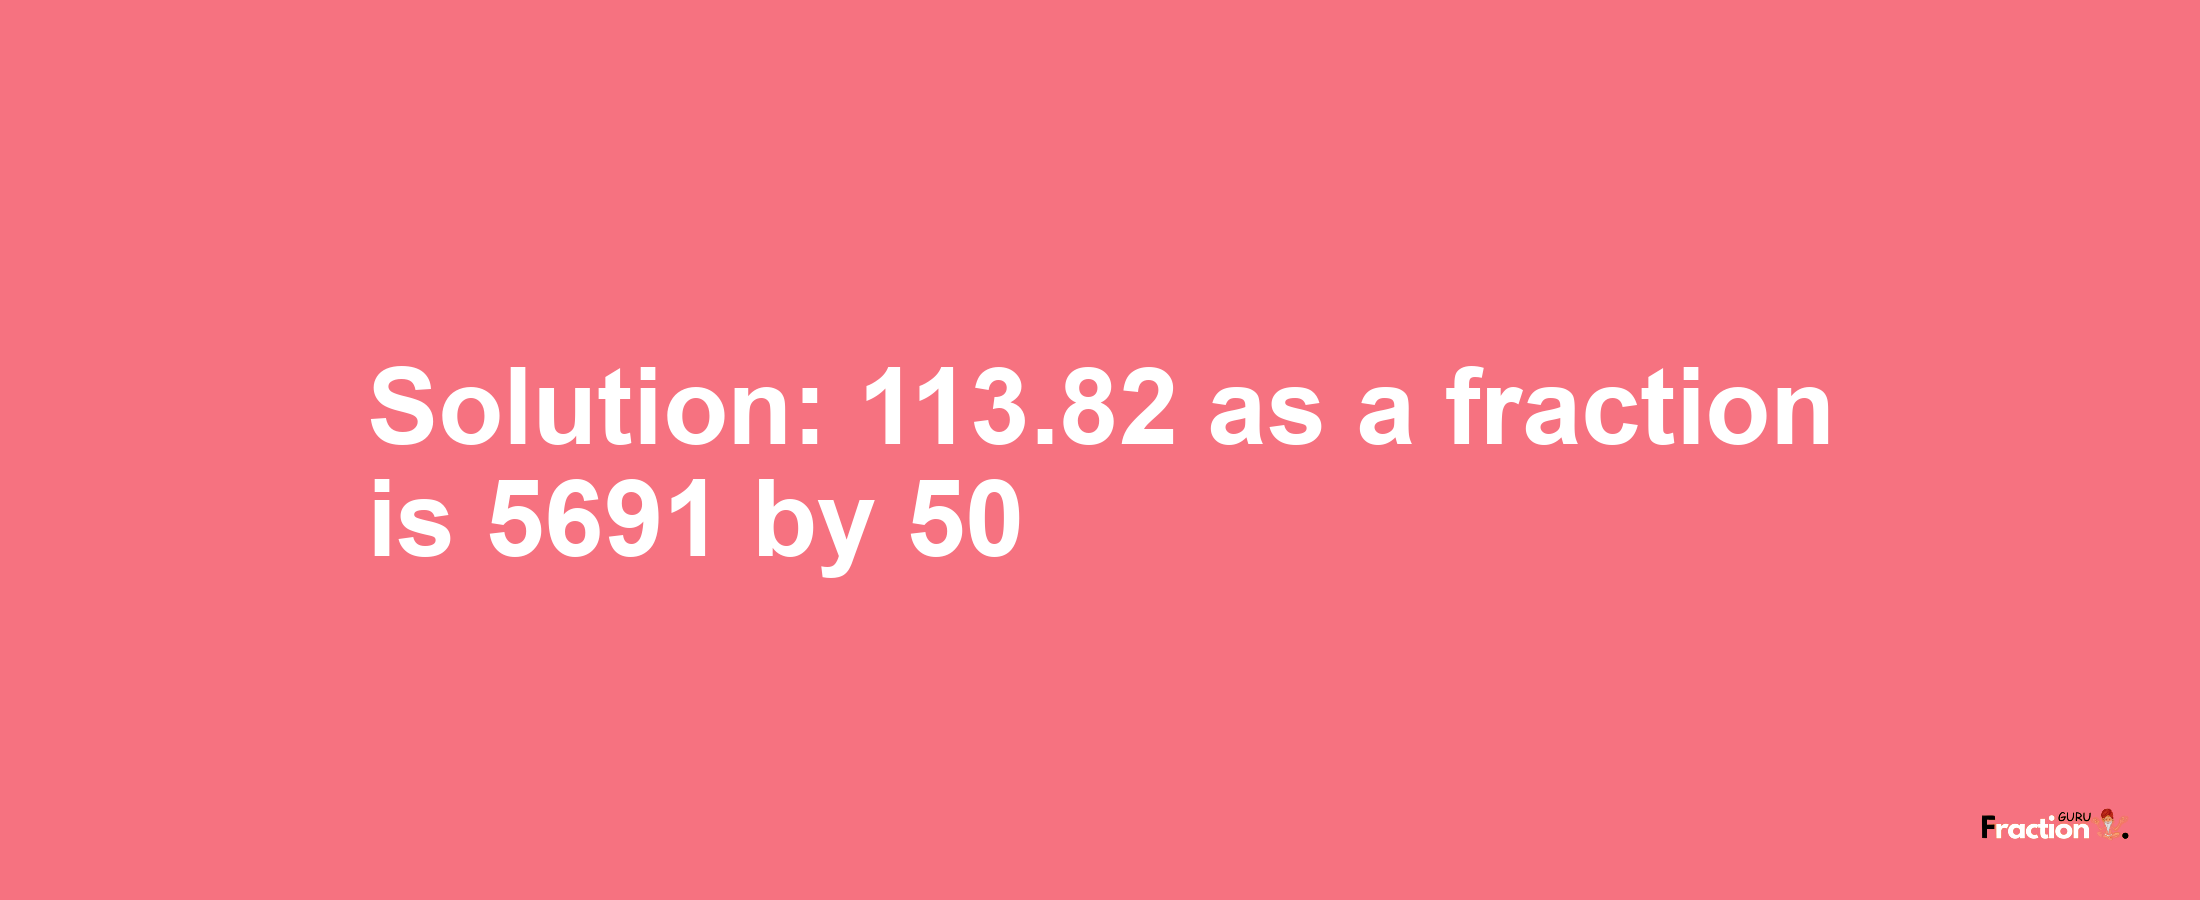 Solution:113.82 as a fraction is 5691/50